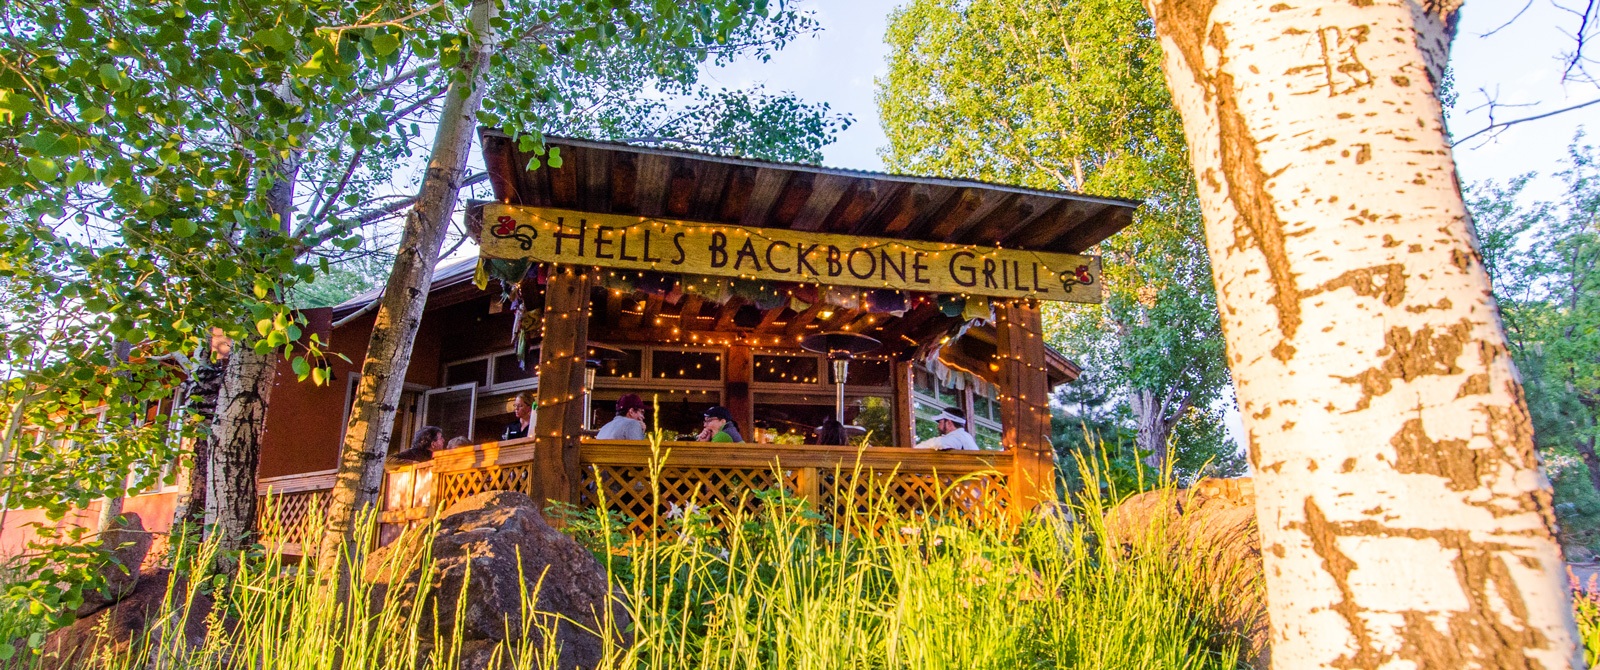 Featured Meal | Hell's Backbone Grill